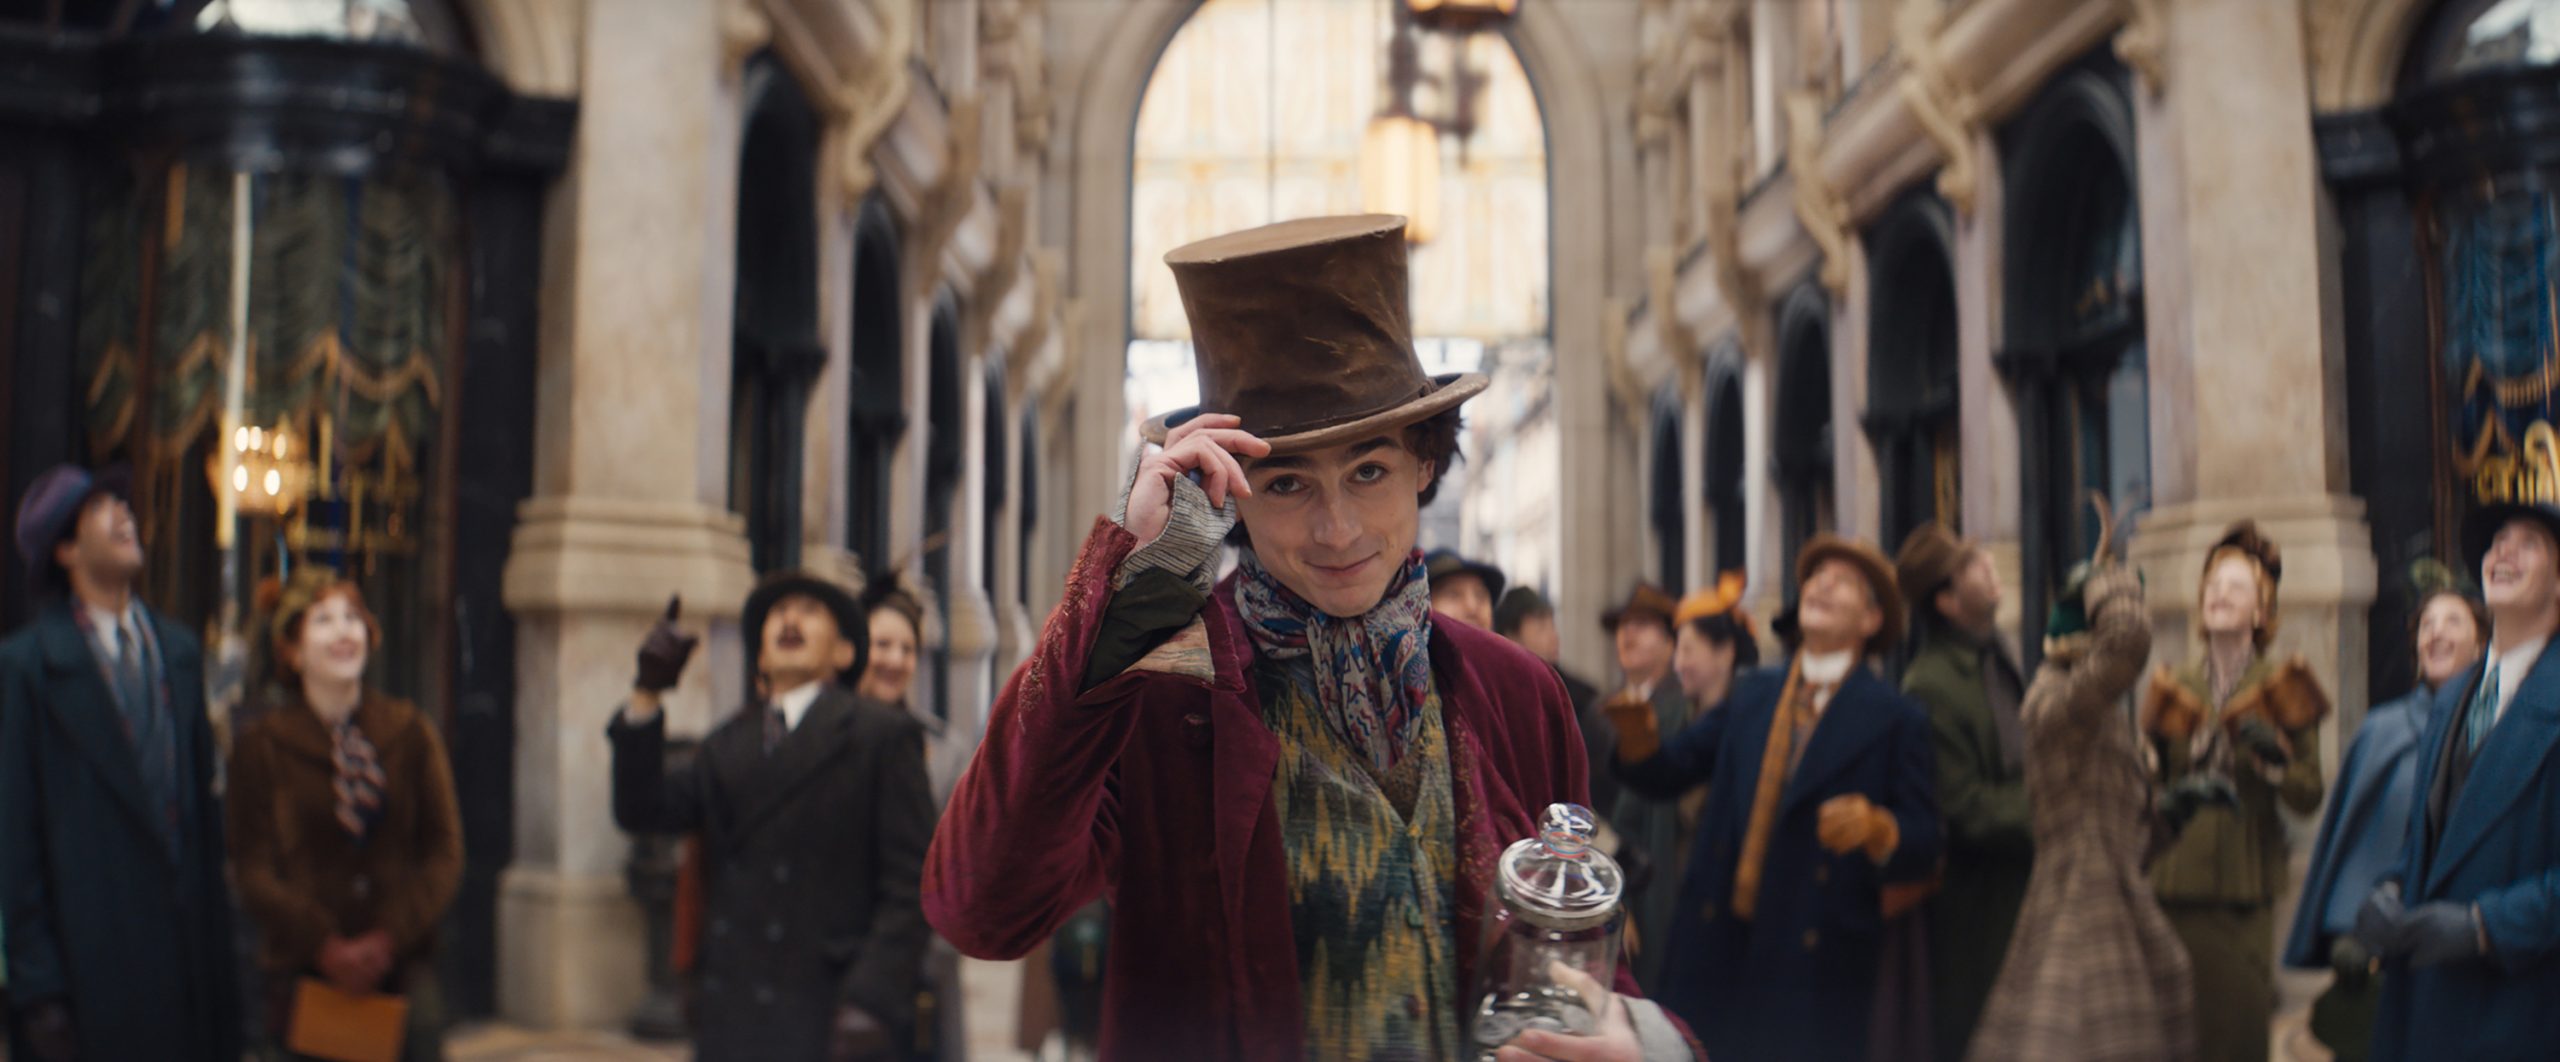 Timothée Chalamet as young Willy Wonka in a scene from “Wonka,” out on Dec. 15. Photo permission from Warner Bros. Pictures/TNS.